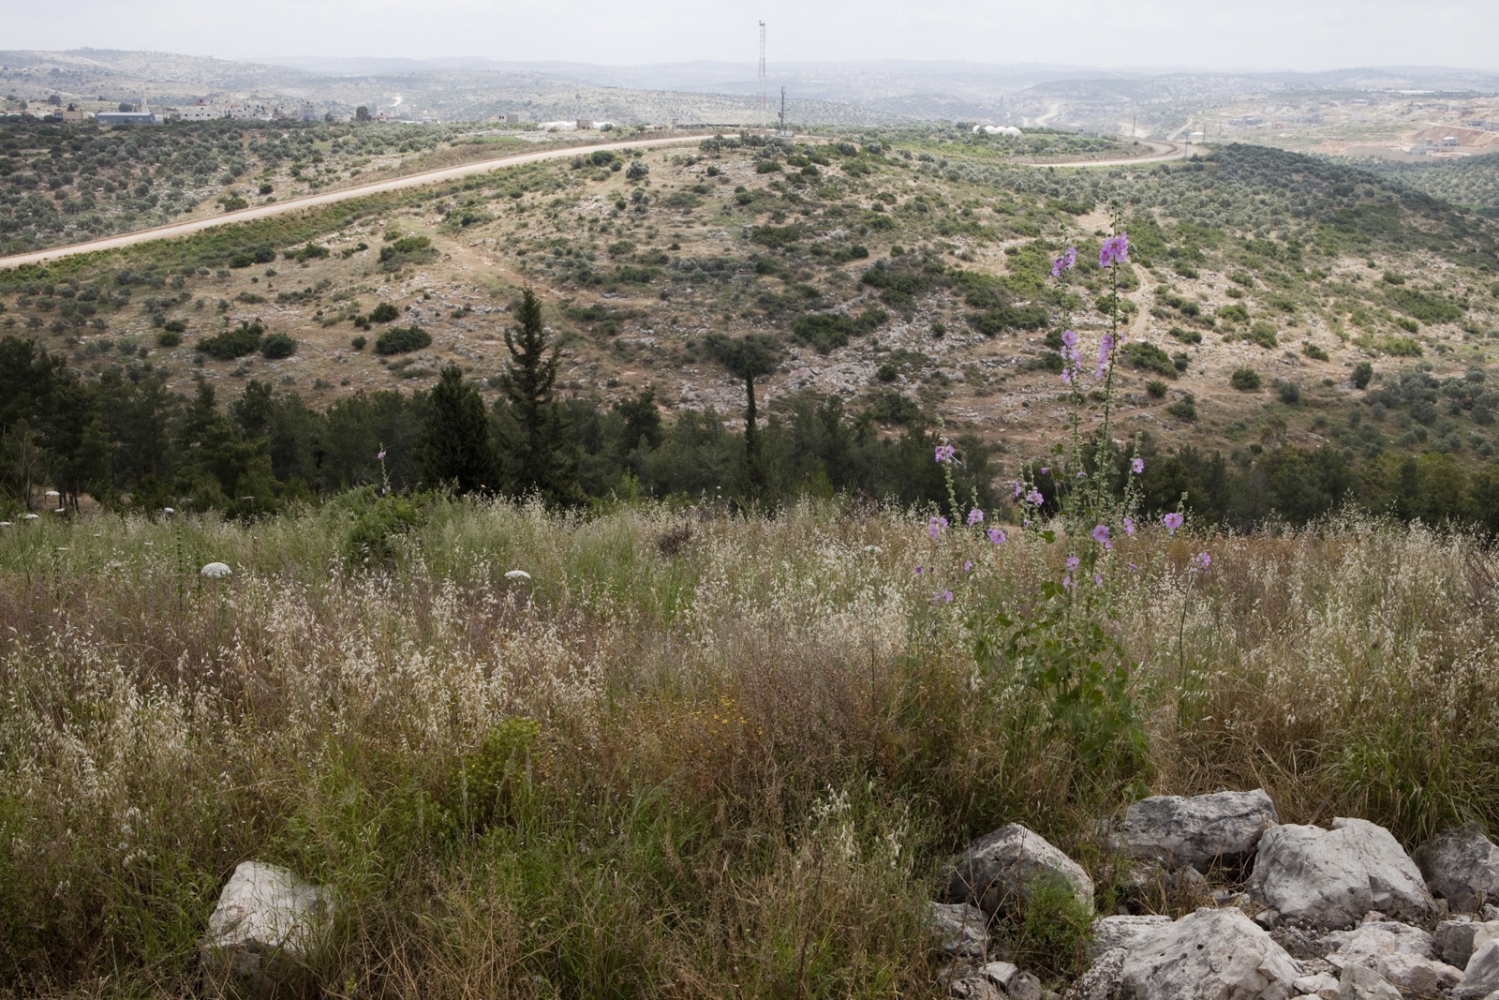  The view looking east across the West Bank from Hezi observation point - a popular barbecue spot...